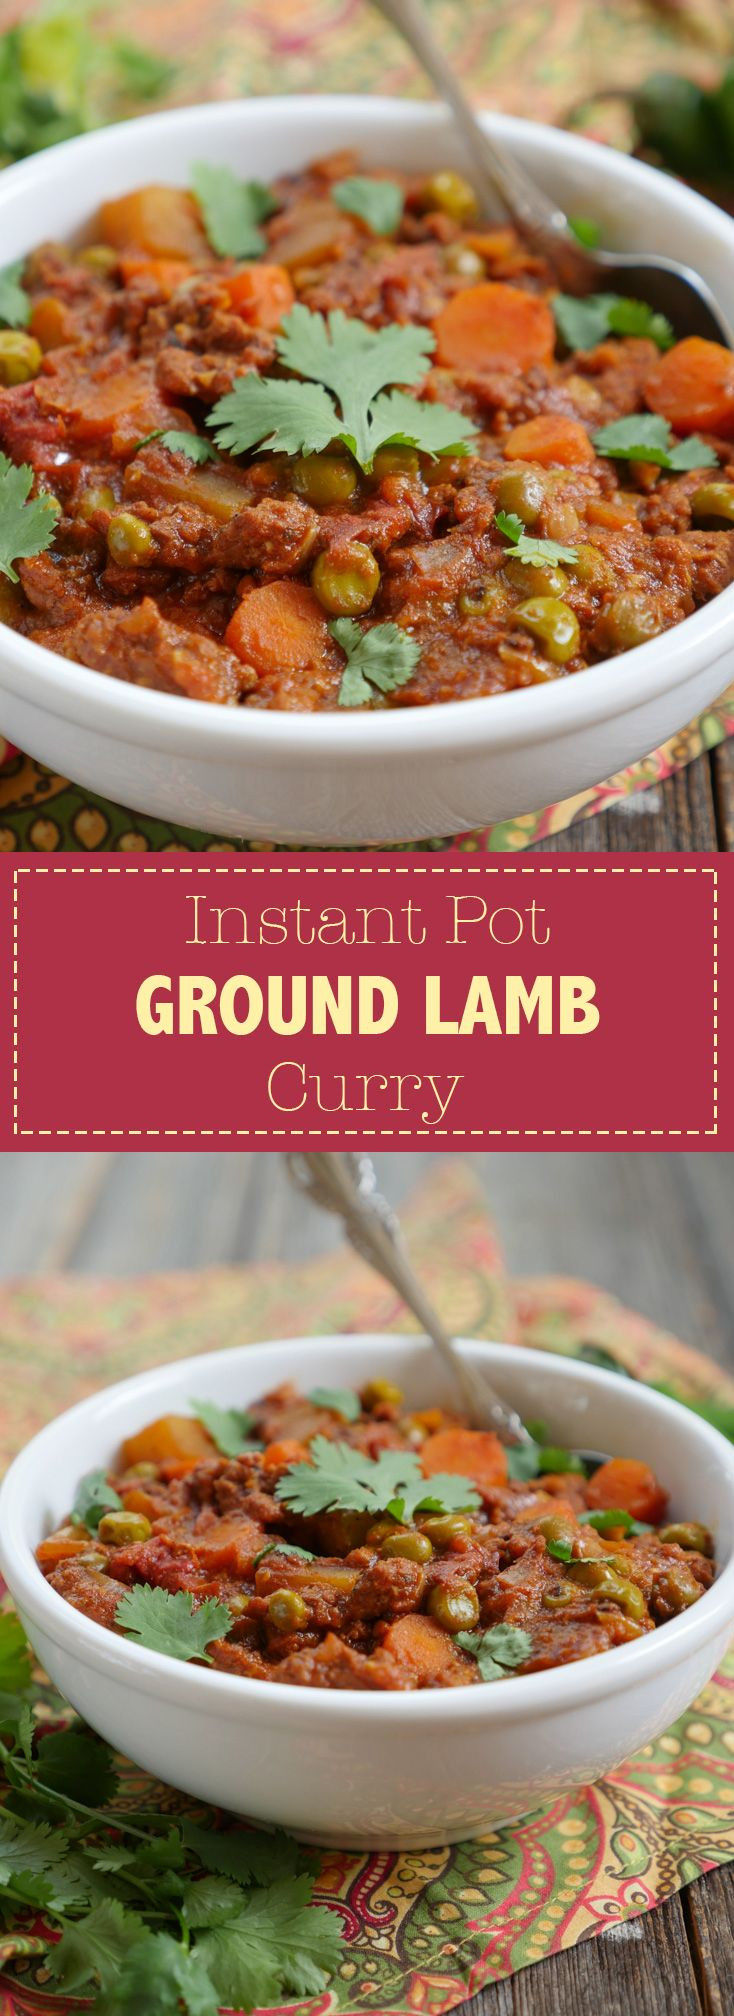 Ground Lamb Indian Recipes
 This Instant Pot Ground Lamb Curry is made with warming